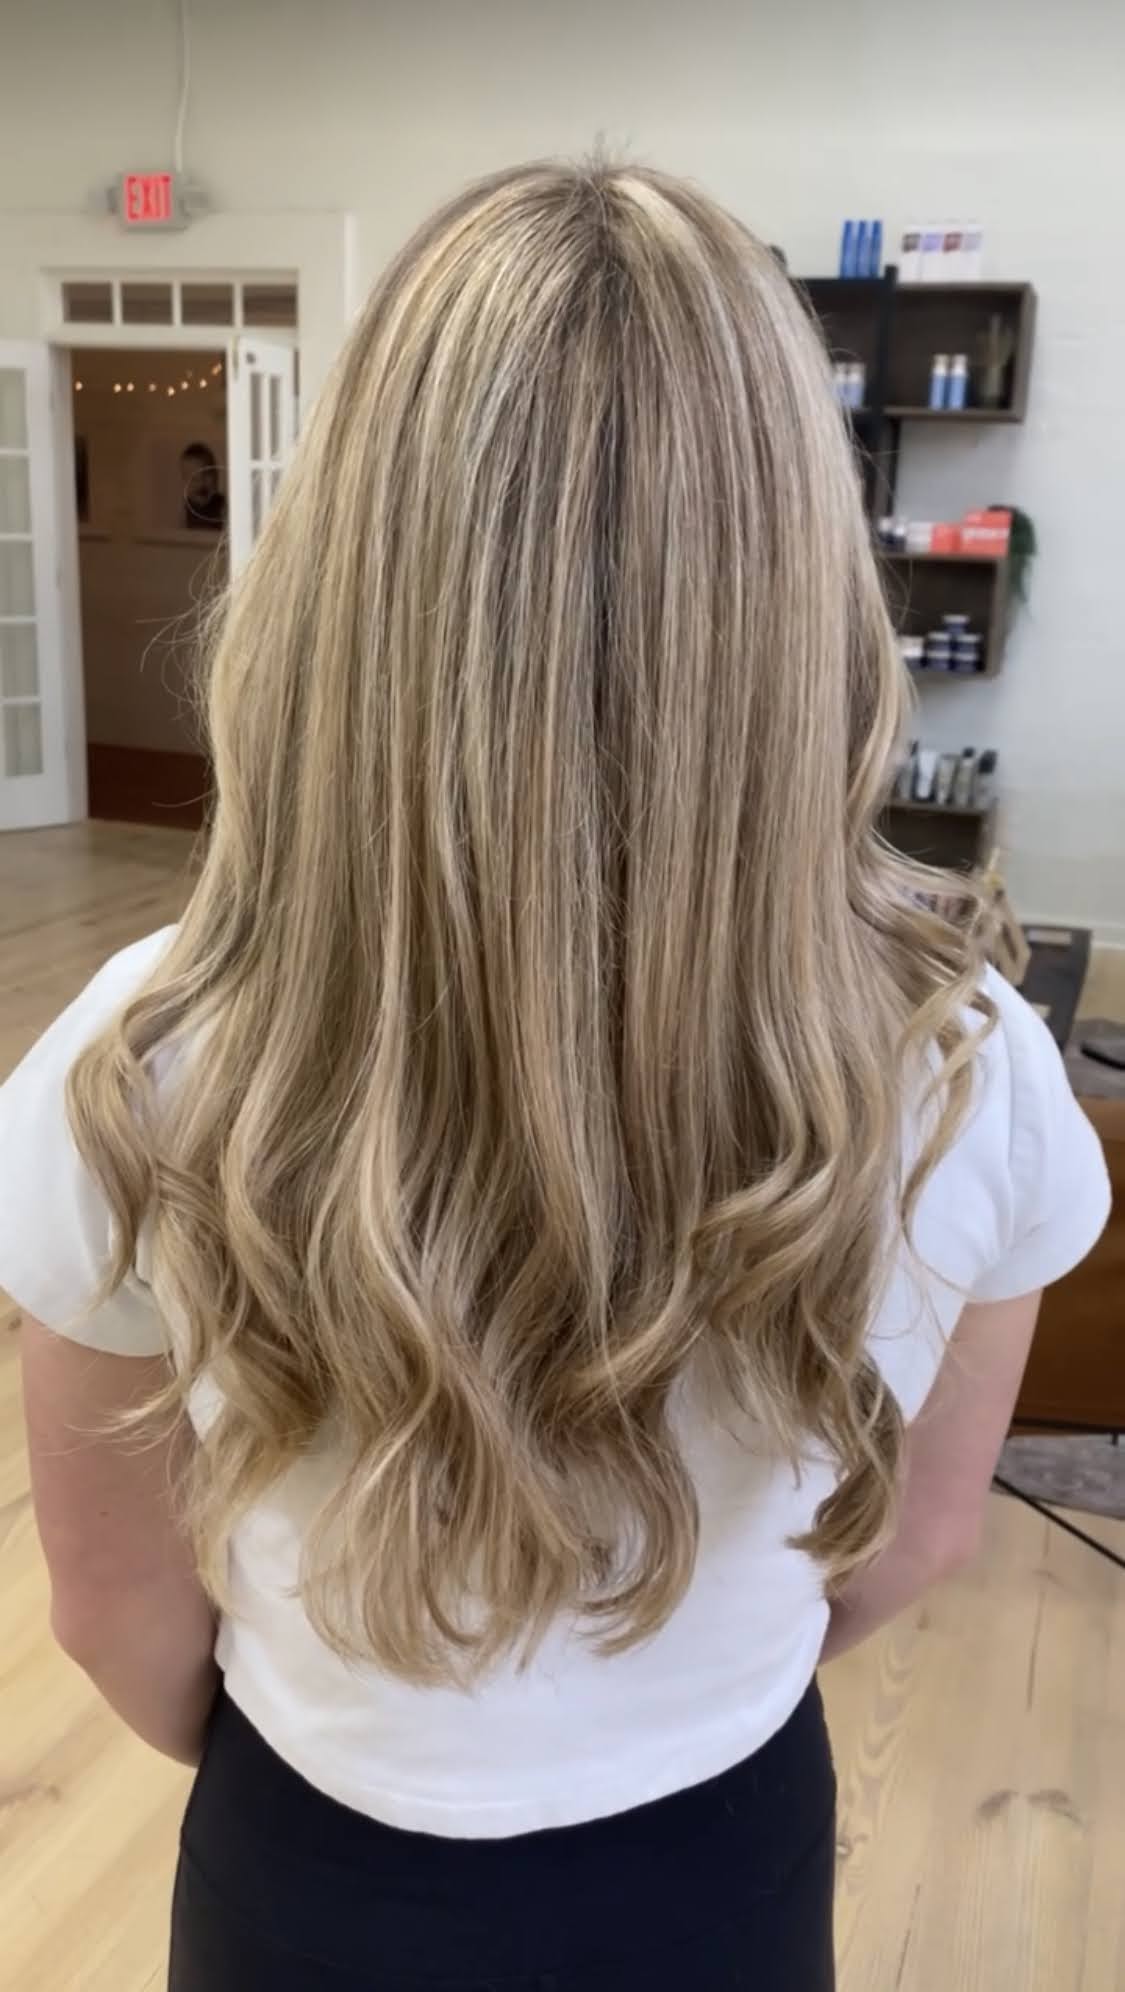 Woman's hair with Balayage Hair Color Technique